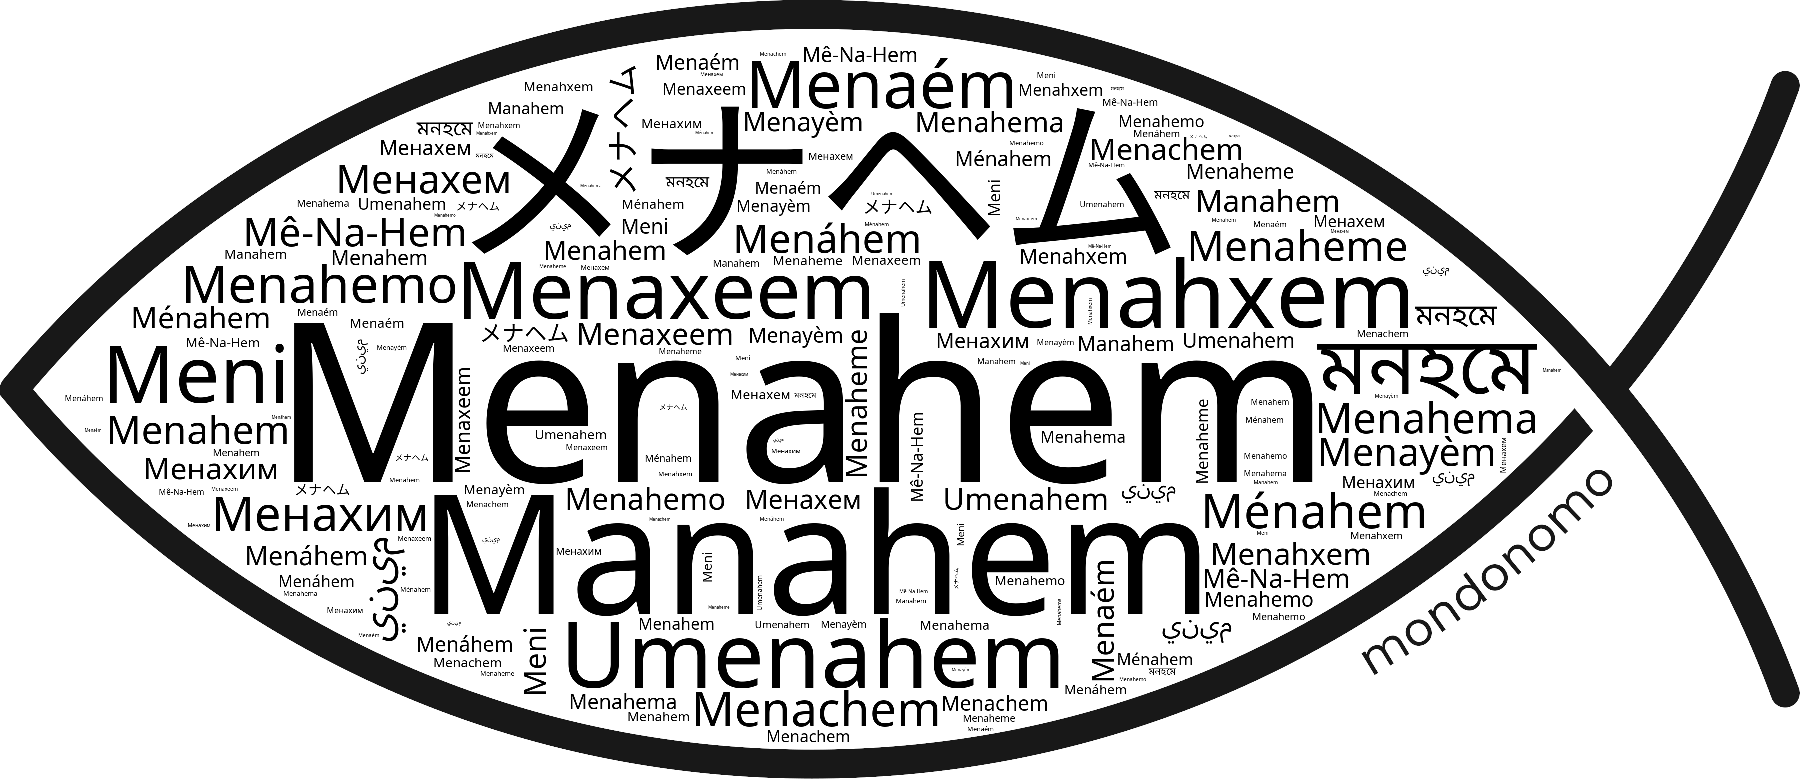 Name Menahem in the world's Bibles